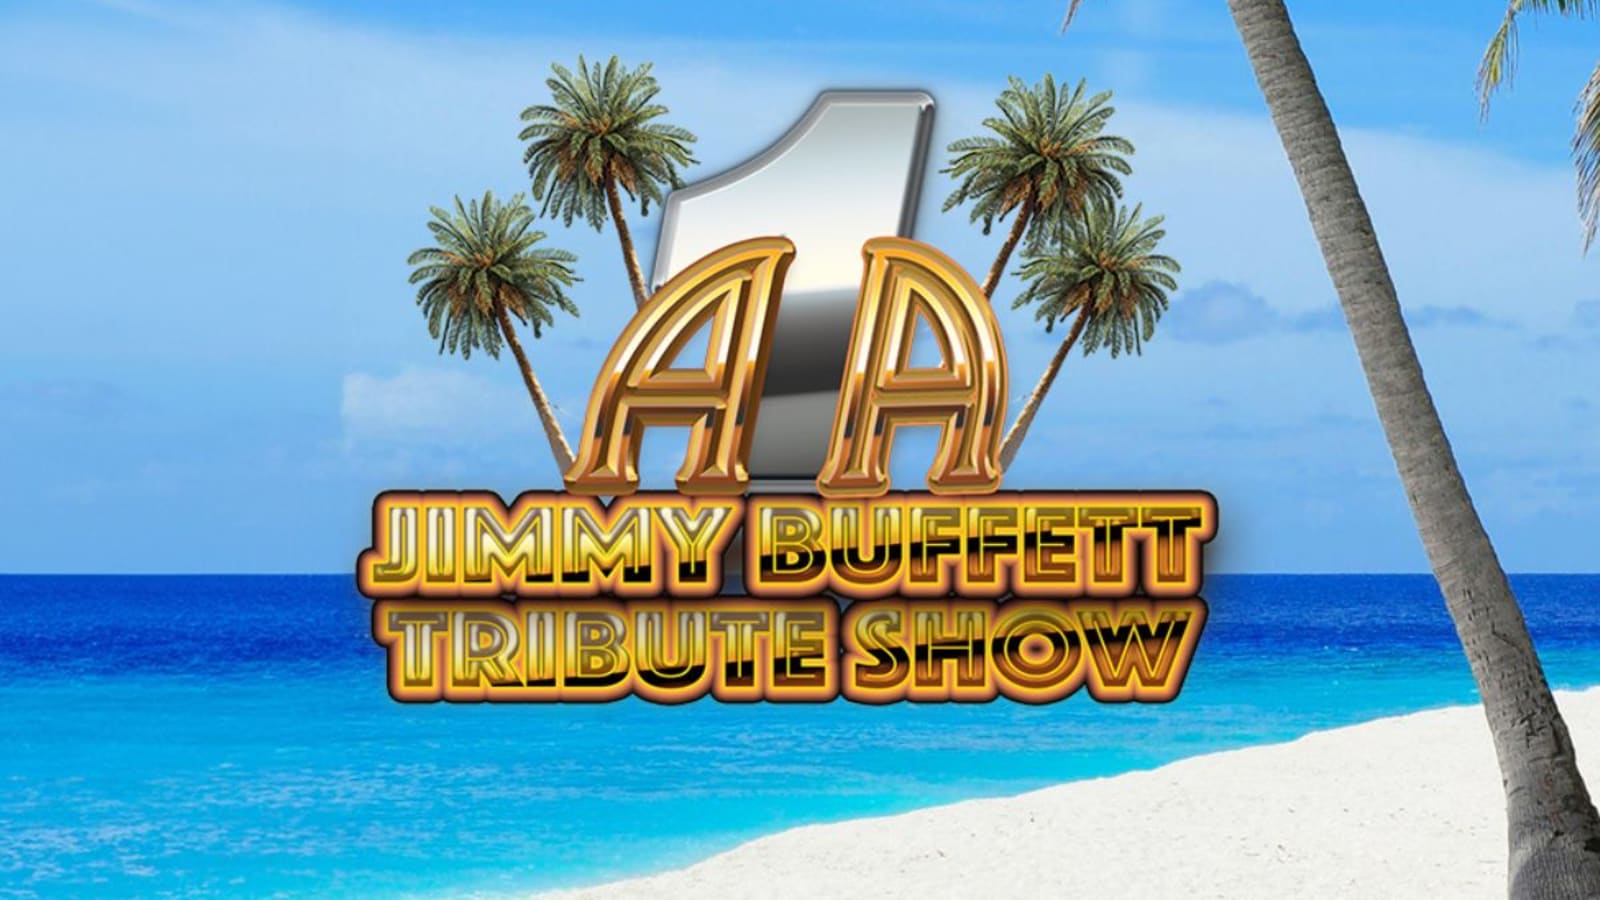 A1A - The Official & Original Jimmy Buffet Tribute